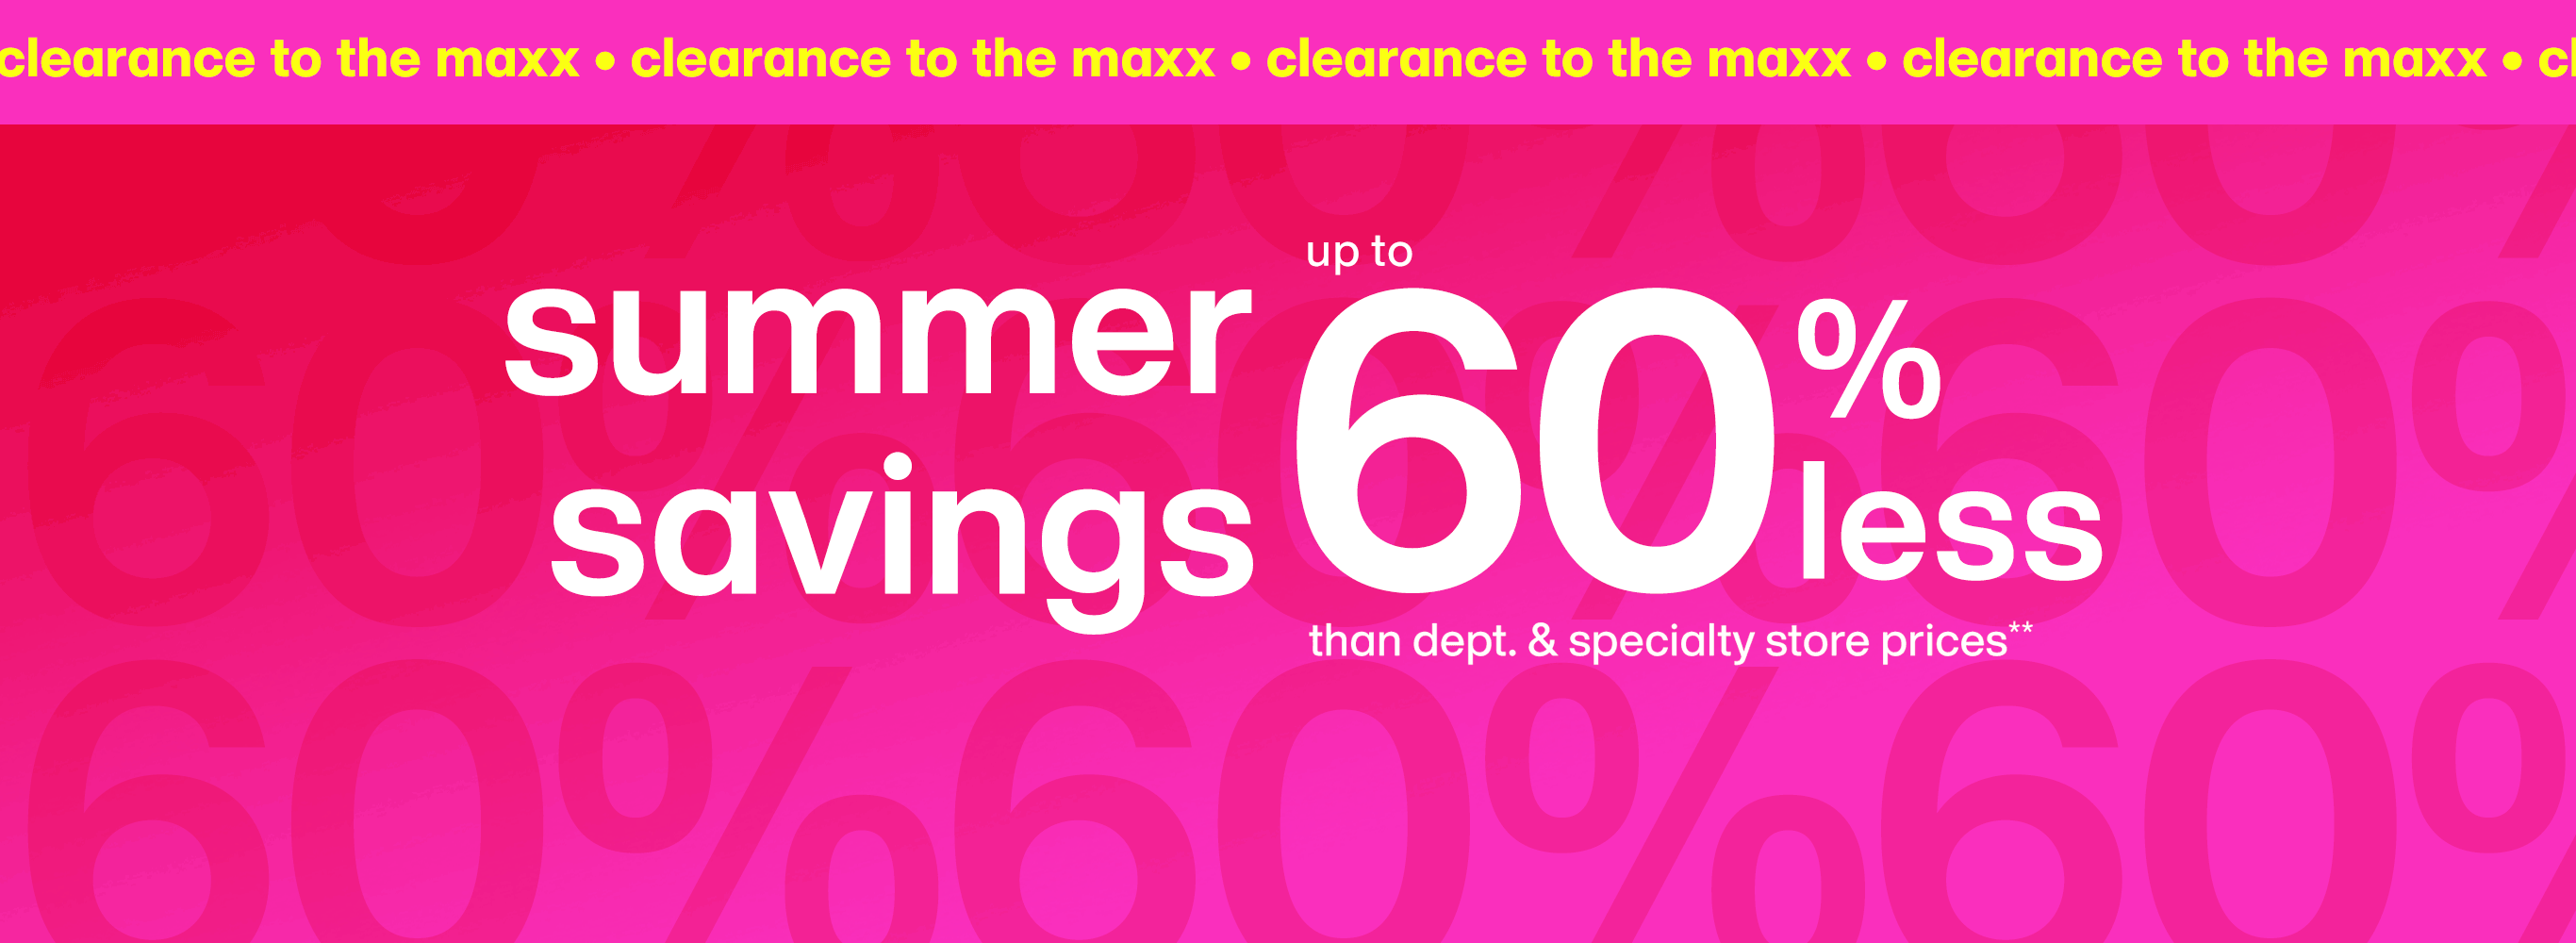 Clearance to the maxx. Summer savings up to 60 percent less than department and specialty store prices.**